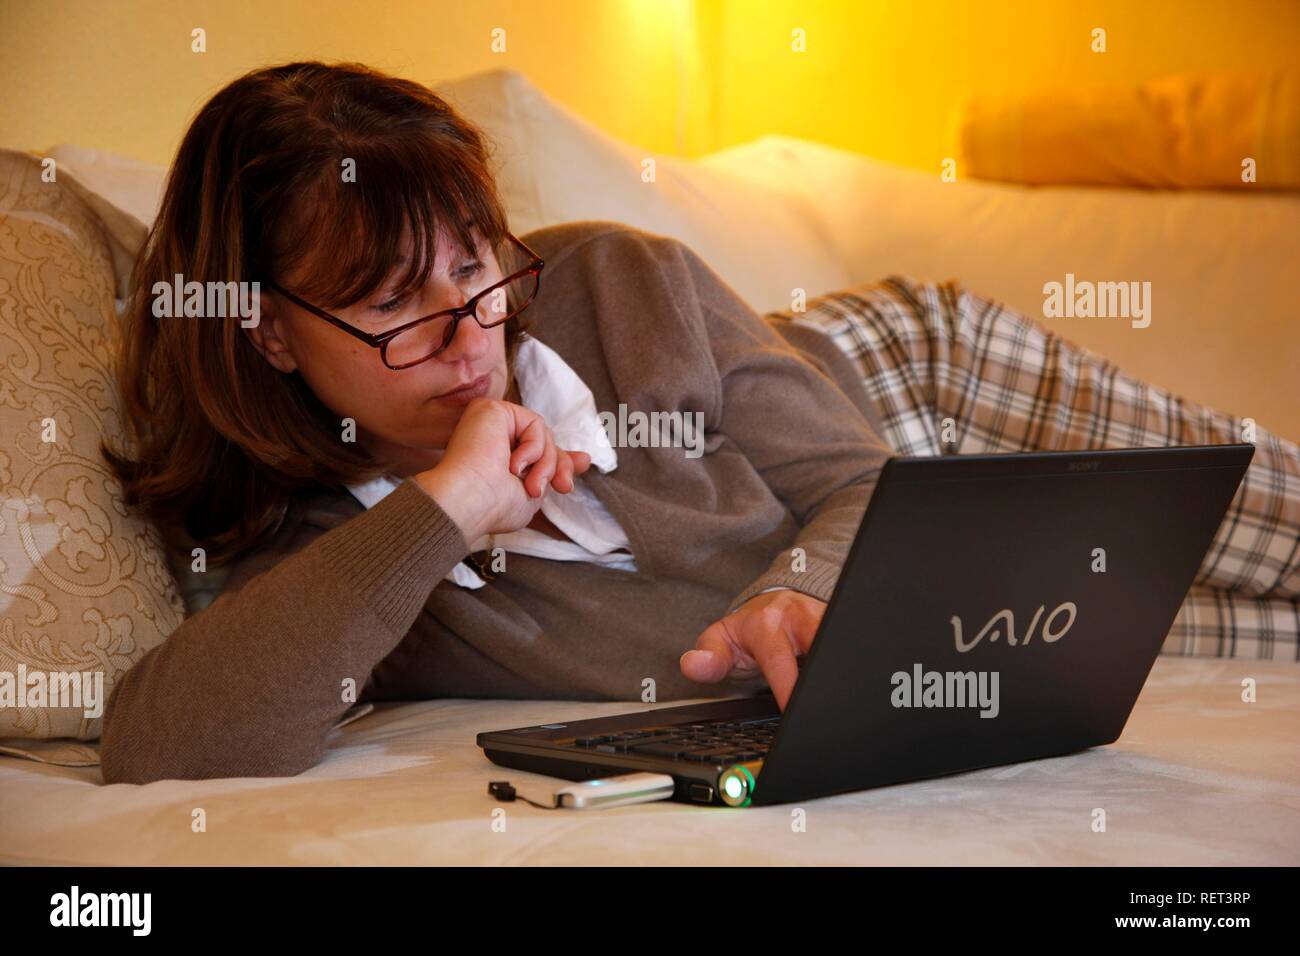 Woman, 45 years old, surfing the internet with a laptop on a sofa, DSL-stick, mobile internet Stock Photo